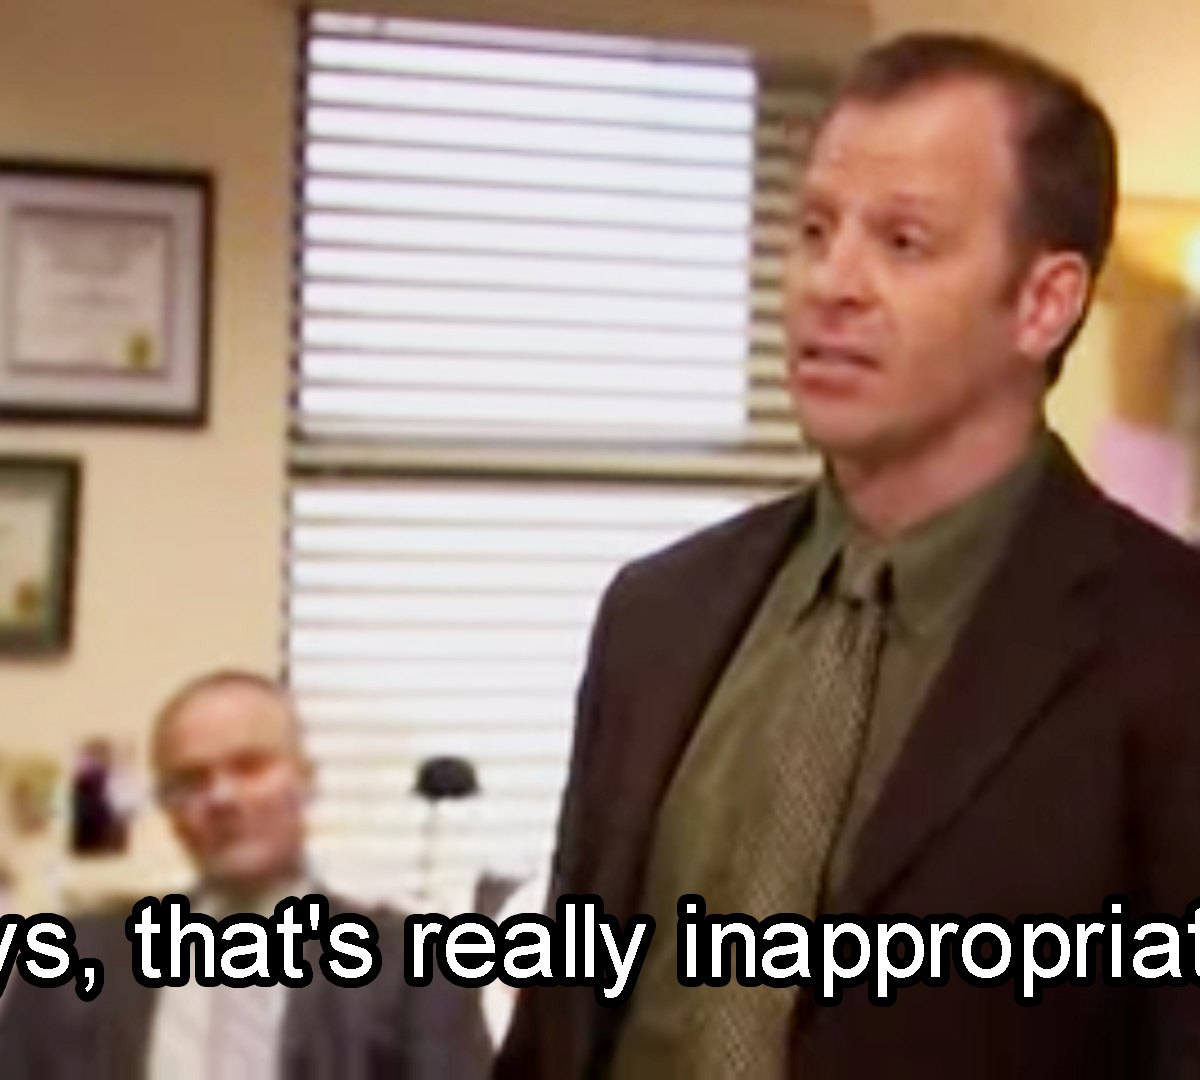 Toby Flenderson Quotes from The Office About Having the Worst Day